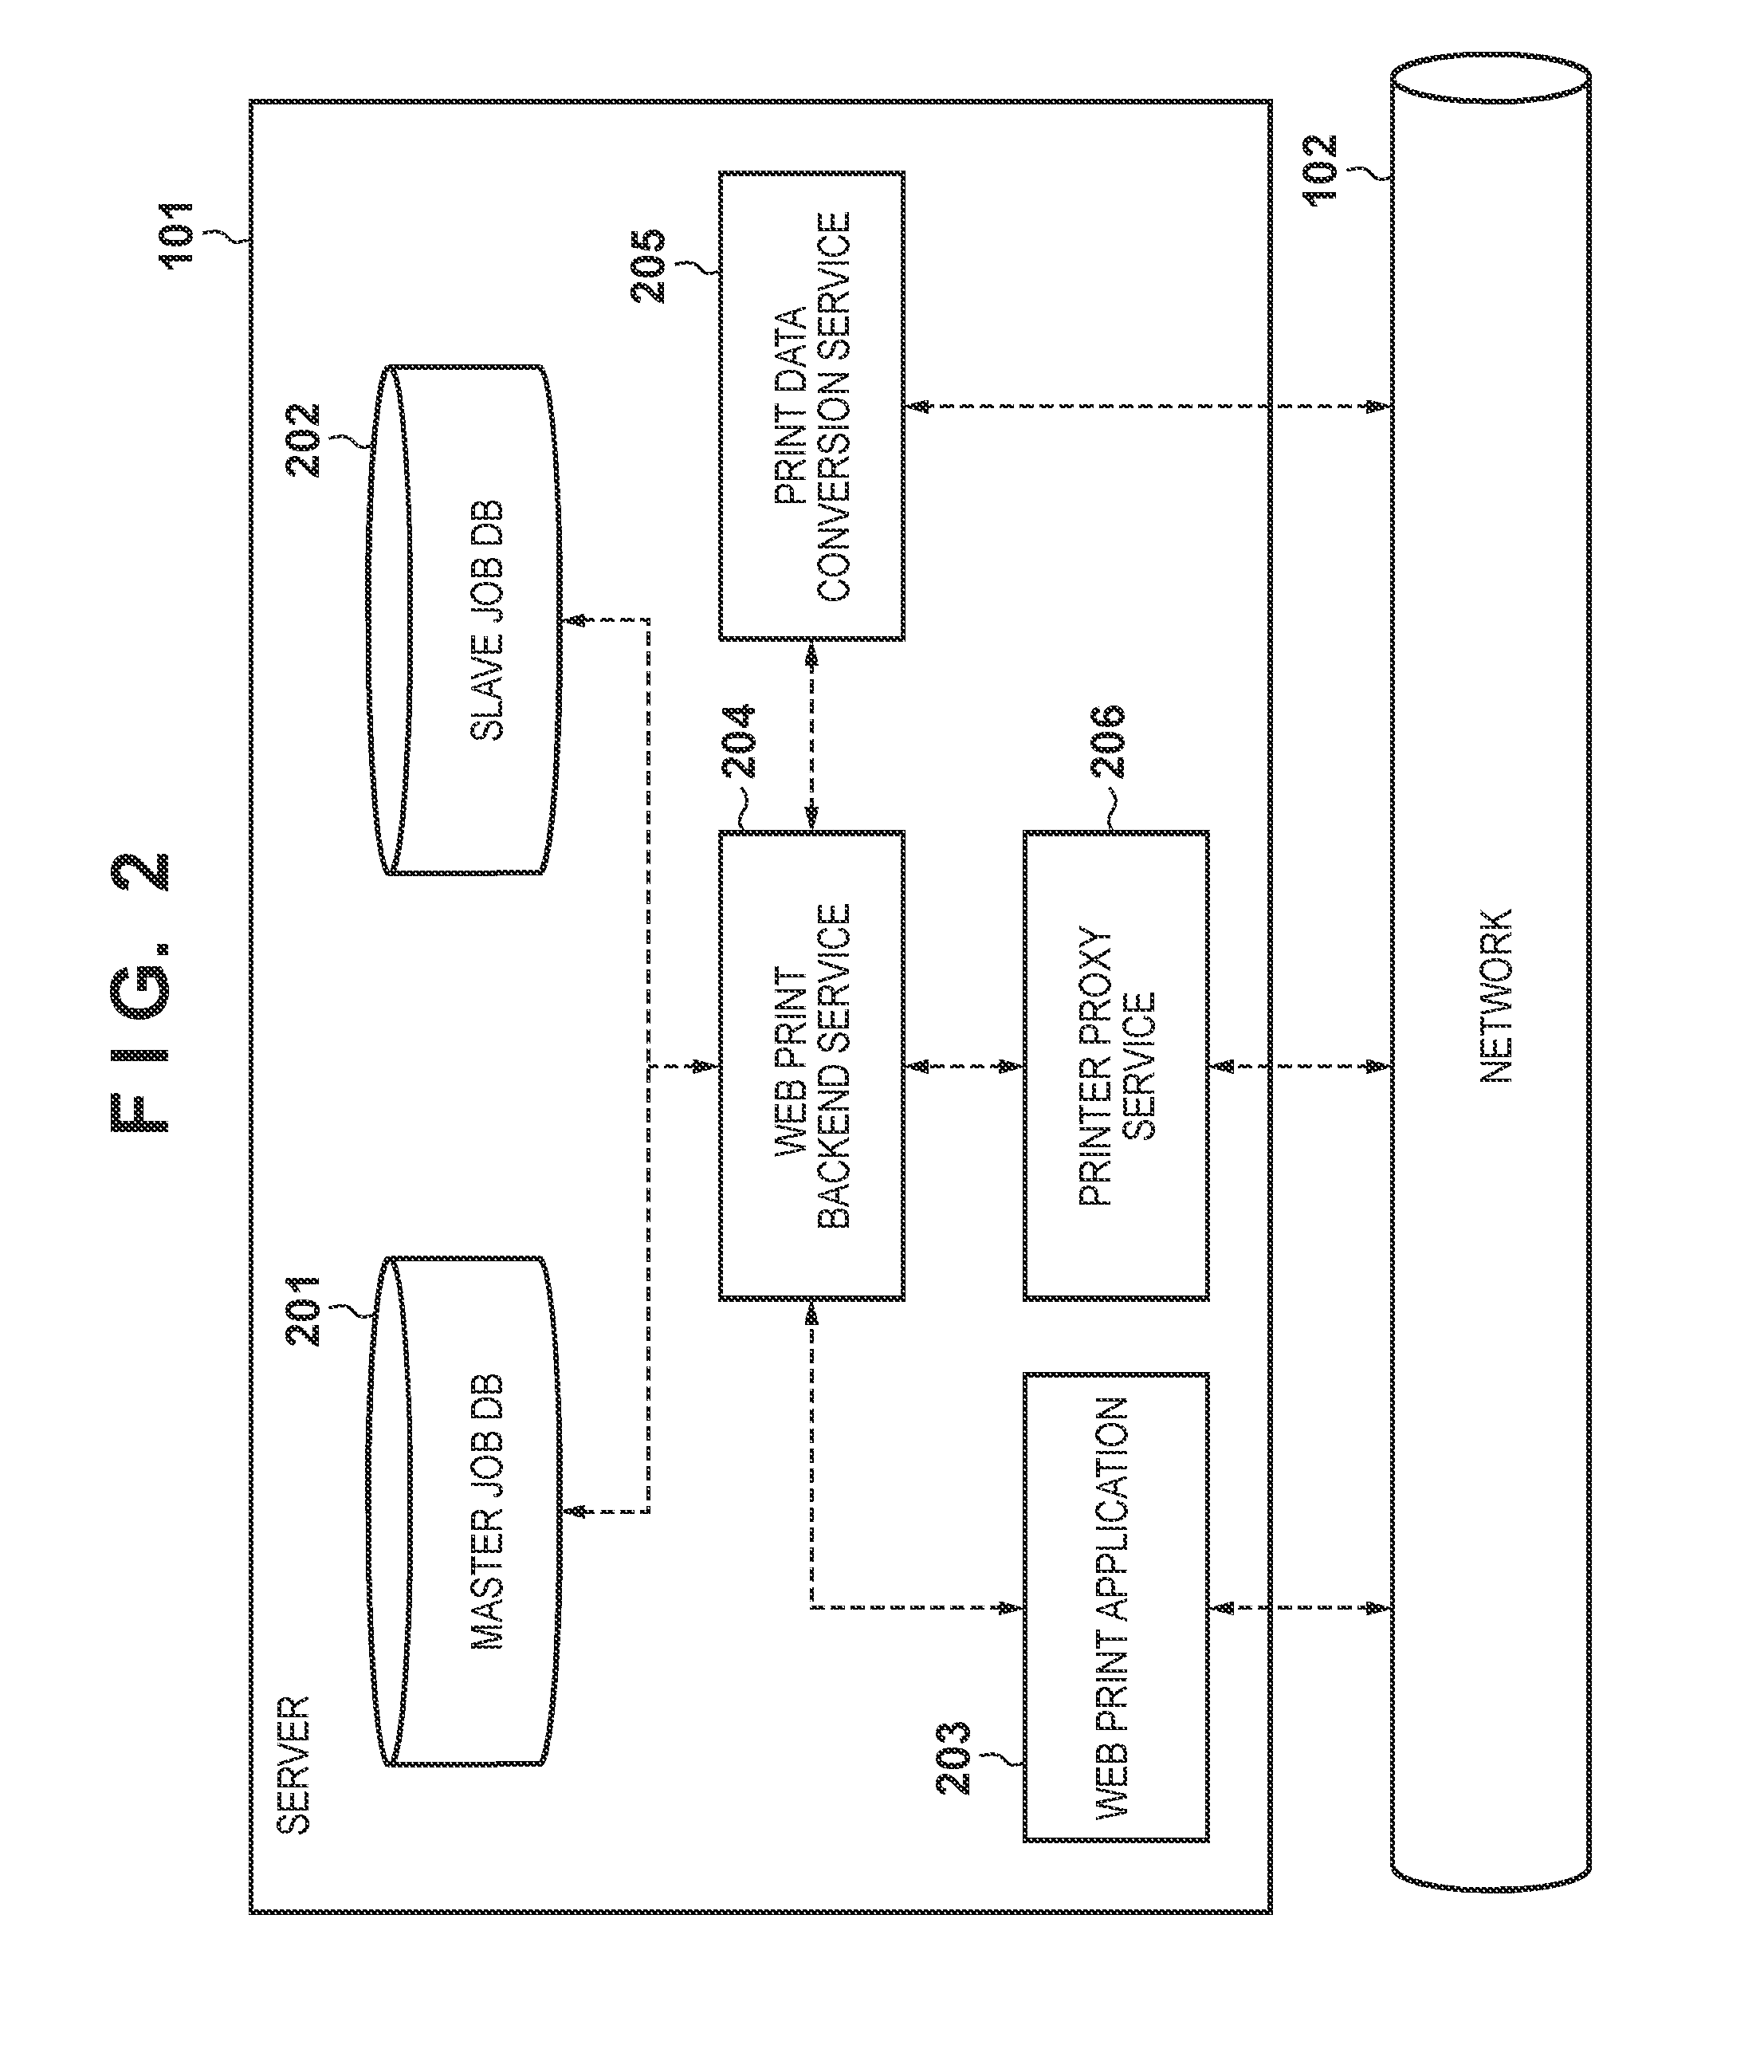 Information processing system comprising one or more apparatuses which manage job information of a job